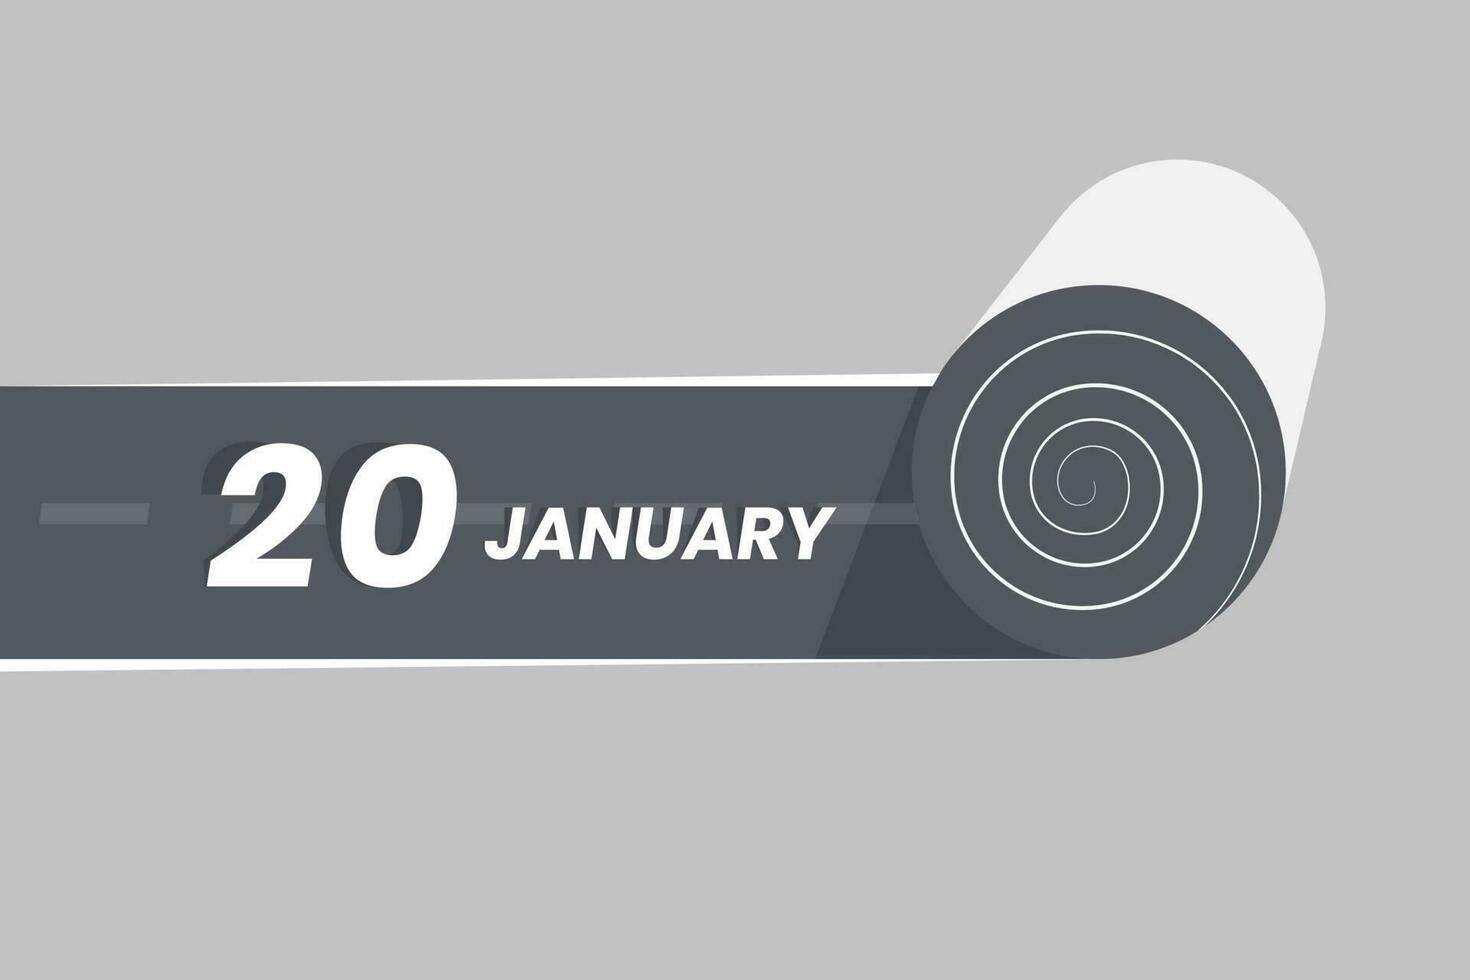 January 20 calendar icon rolling inside the road. 20 January Date Month icon vector illustrator.